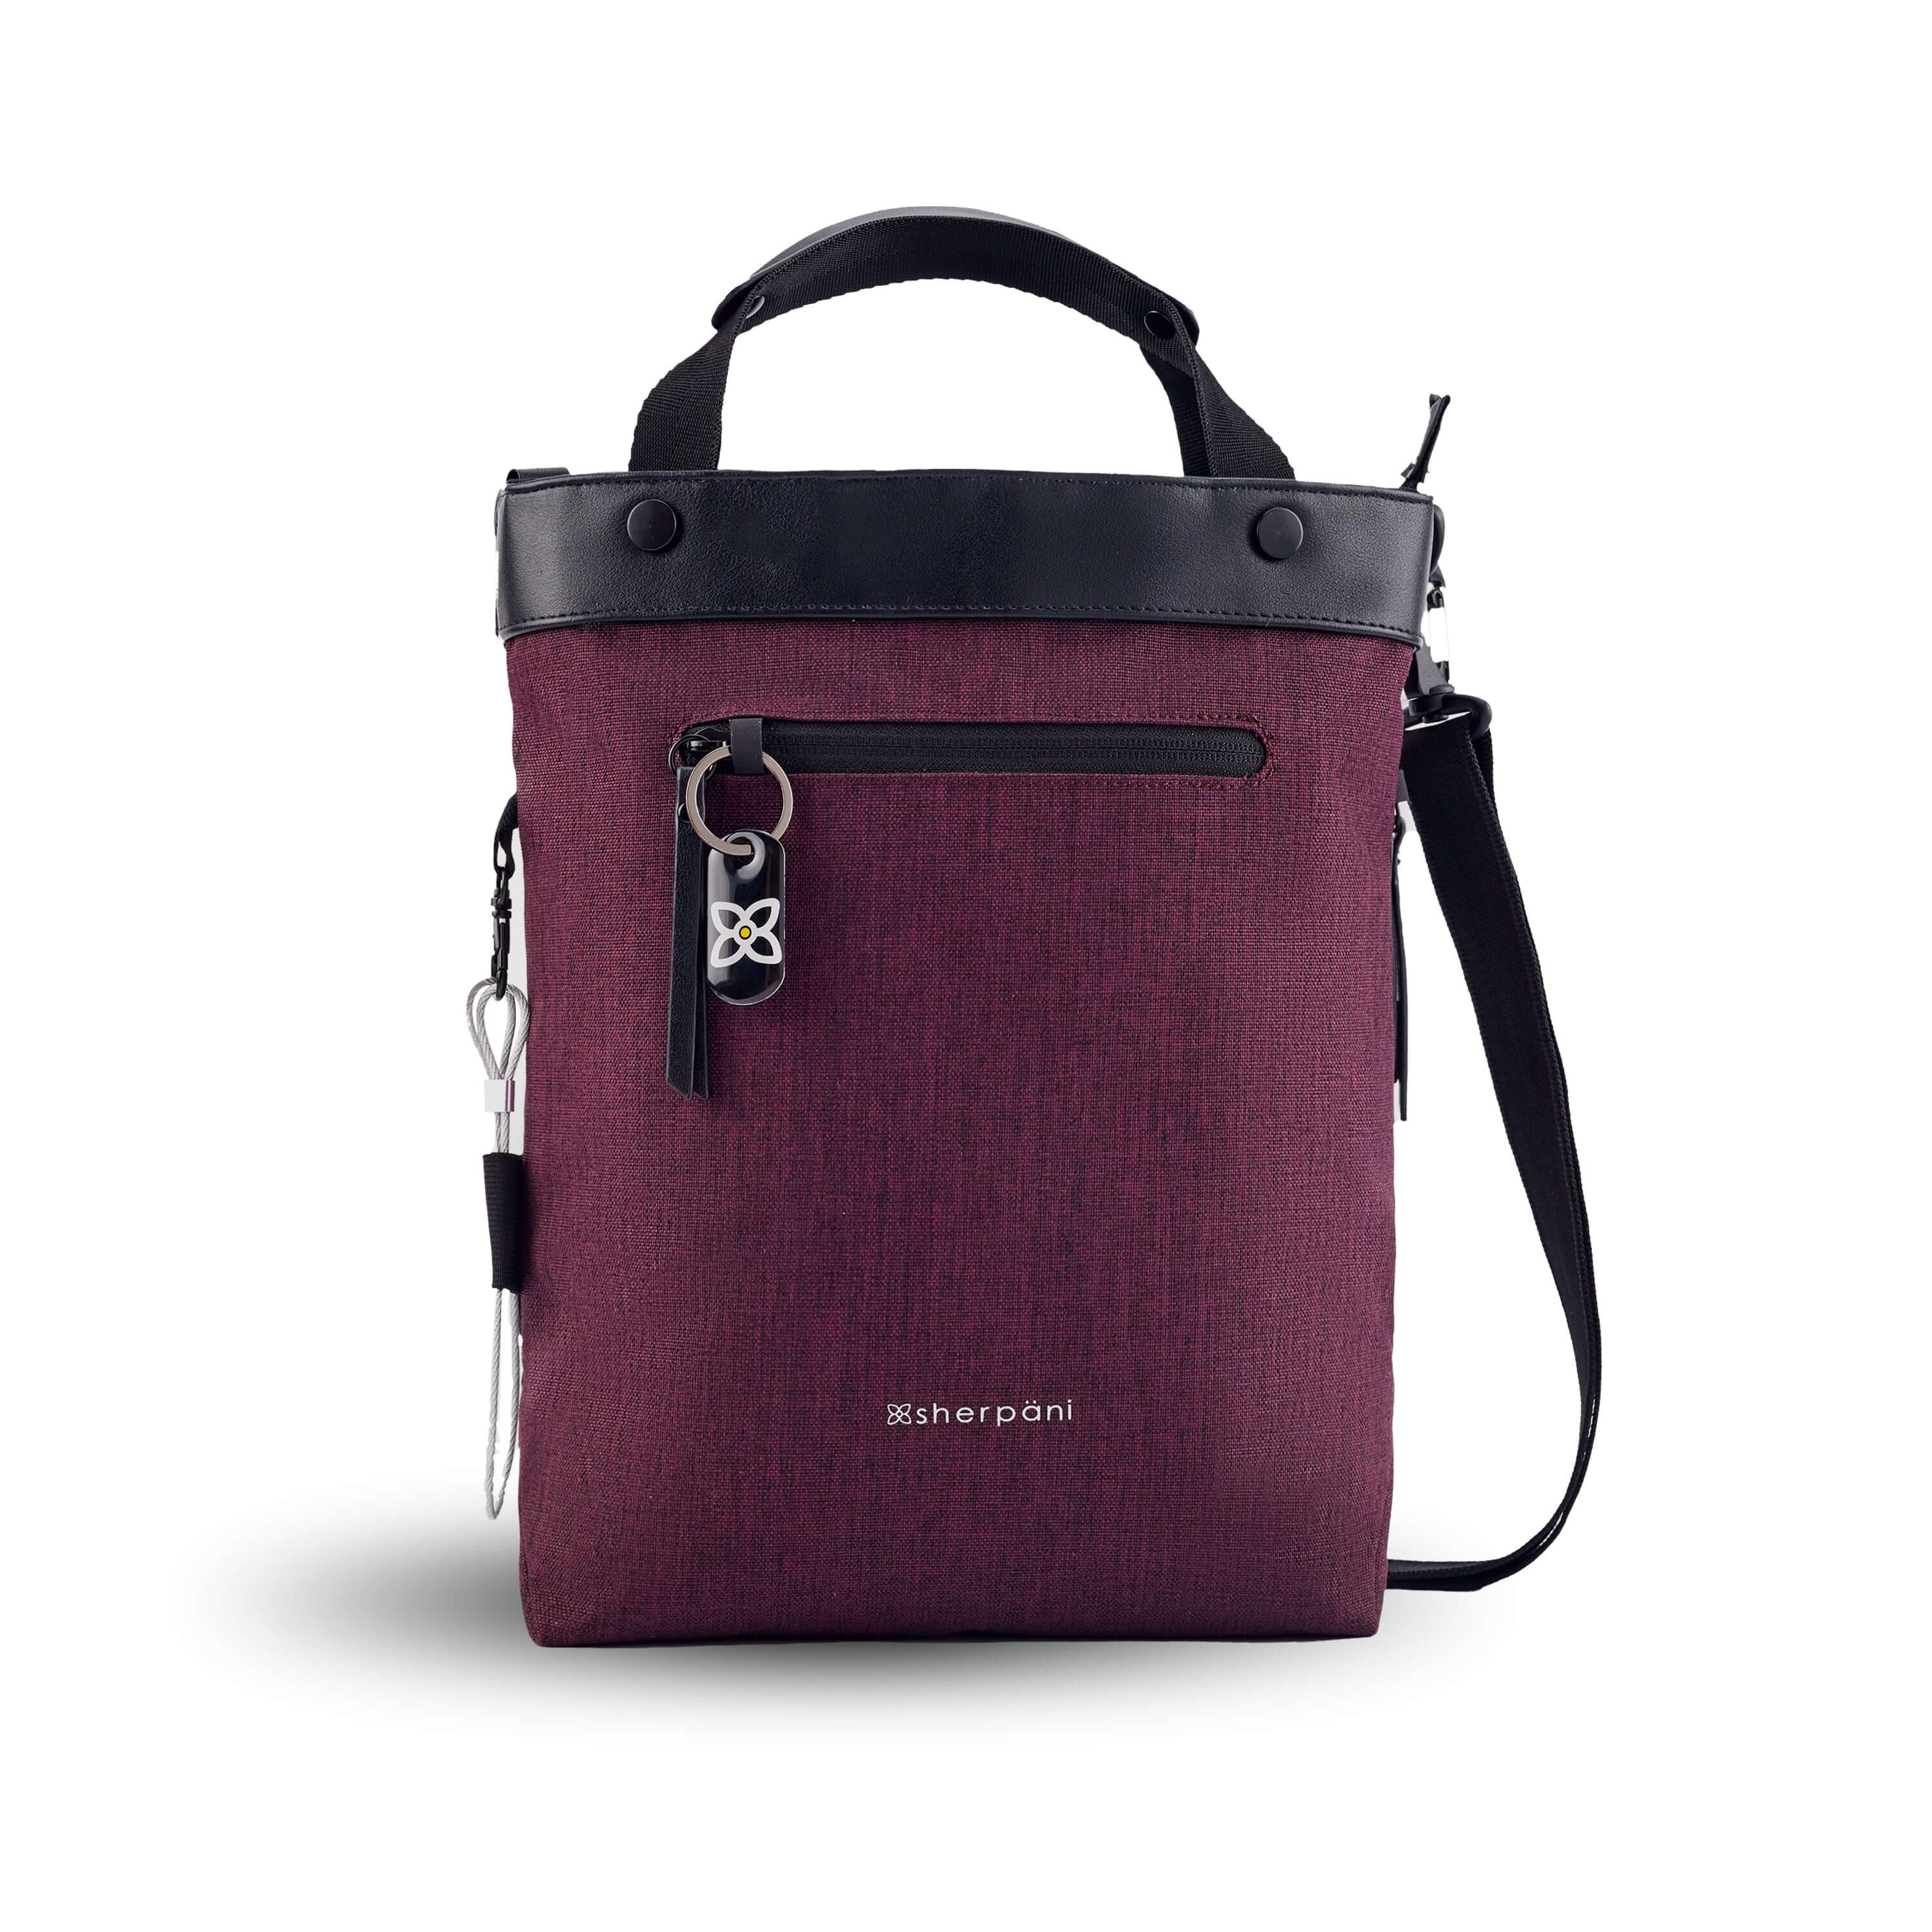 Flat front view of Sherpani's Anti-Theft bag, the Geo AT in Merlot, with vegan leather accents in black. The bag features short tote handles and an adjustable/detachable crossbody strap. There is a locking zipper compartment on the front with a ReturnMe tag. A chair loop lock is clipped to the side and secured in place by an elastic tab.